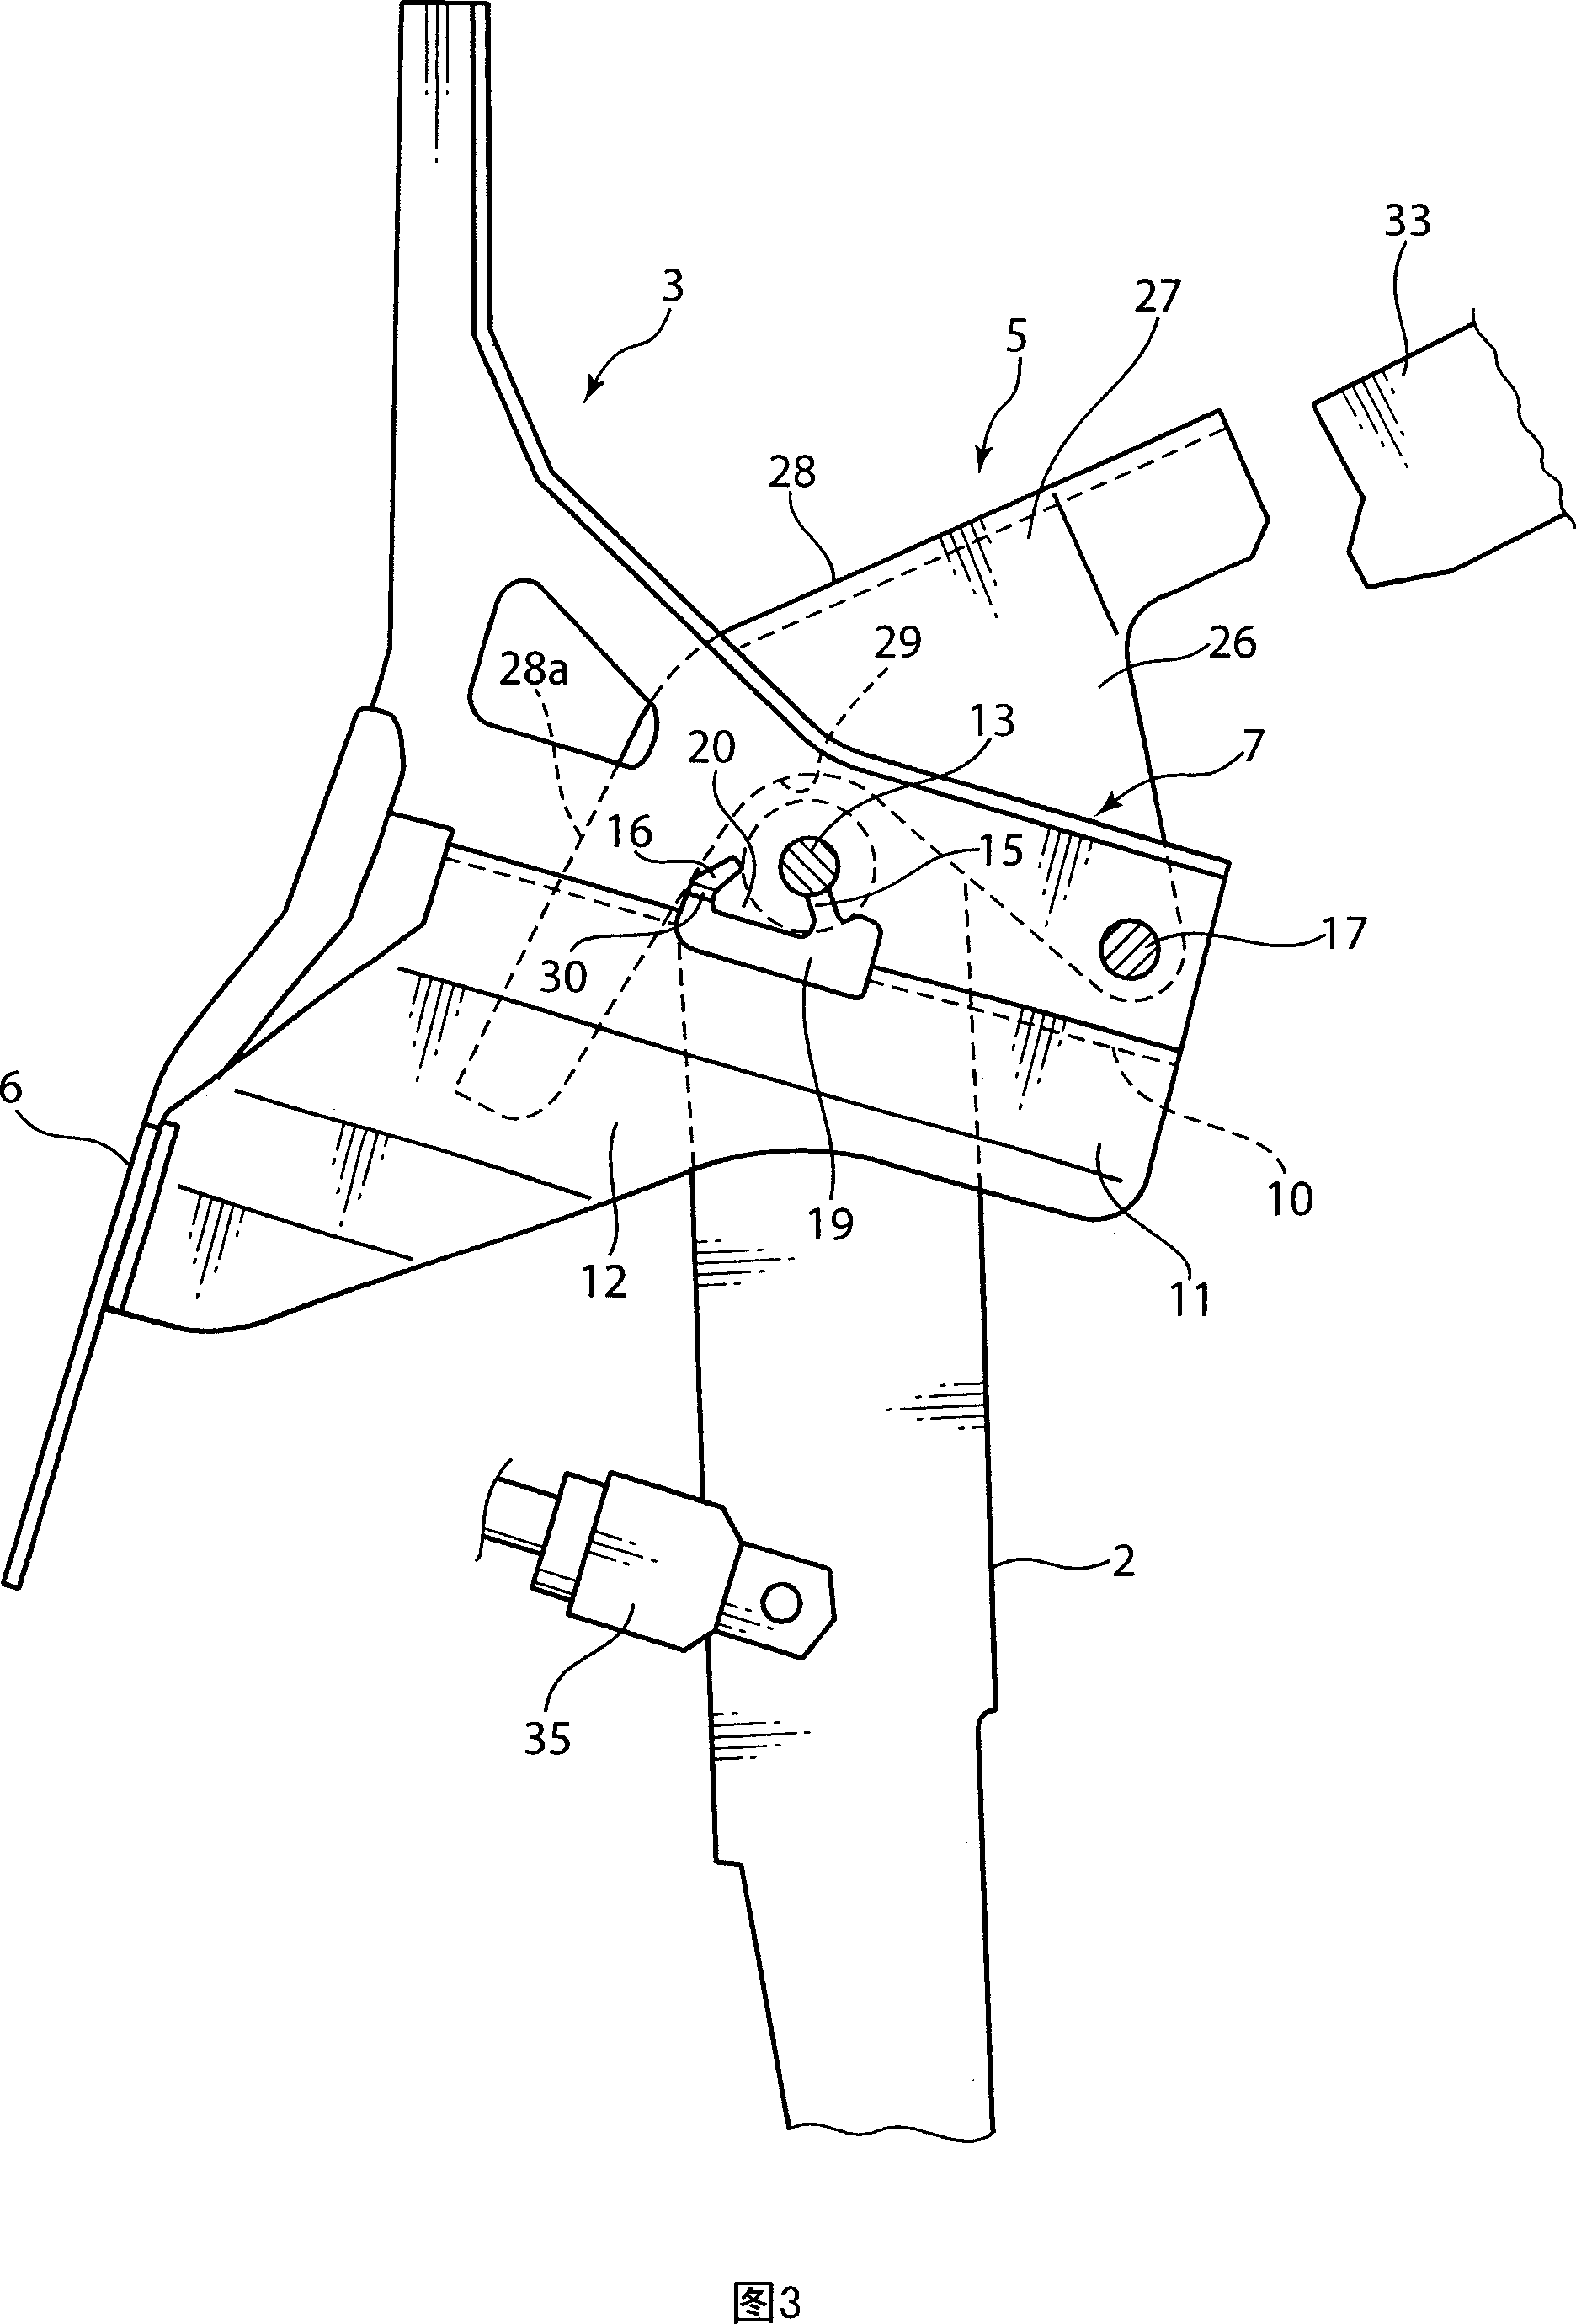 Support structure for control pedal